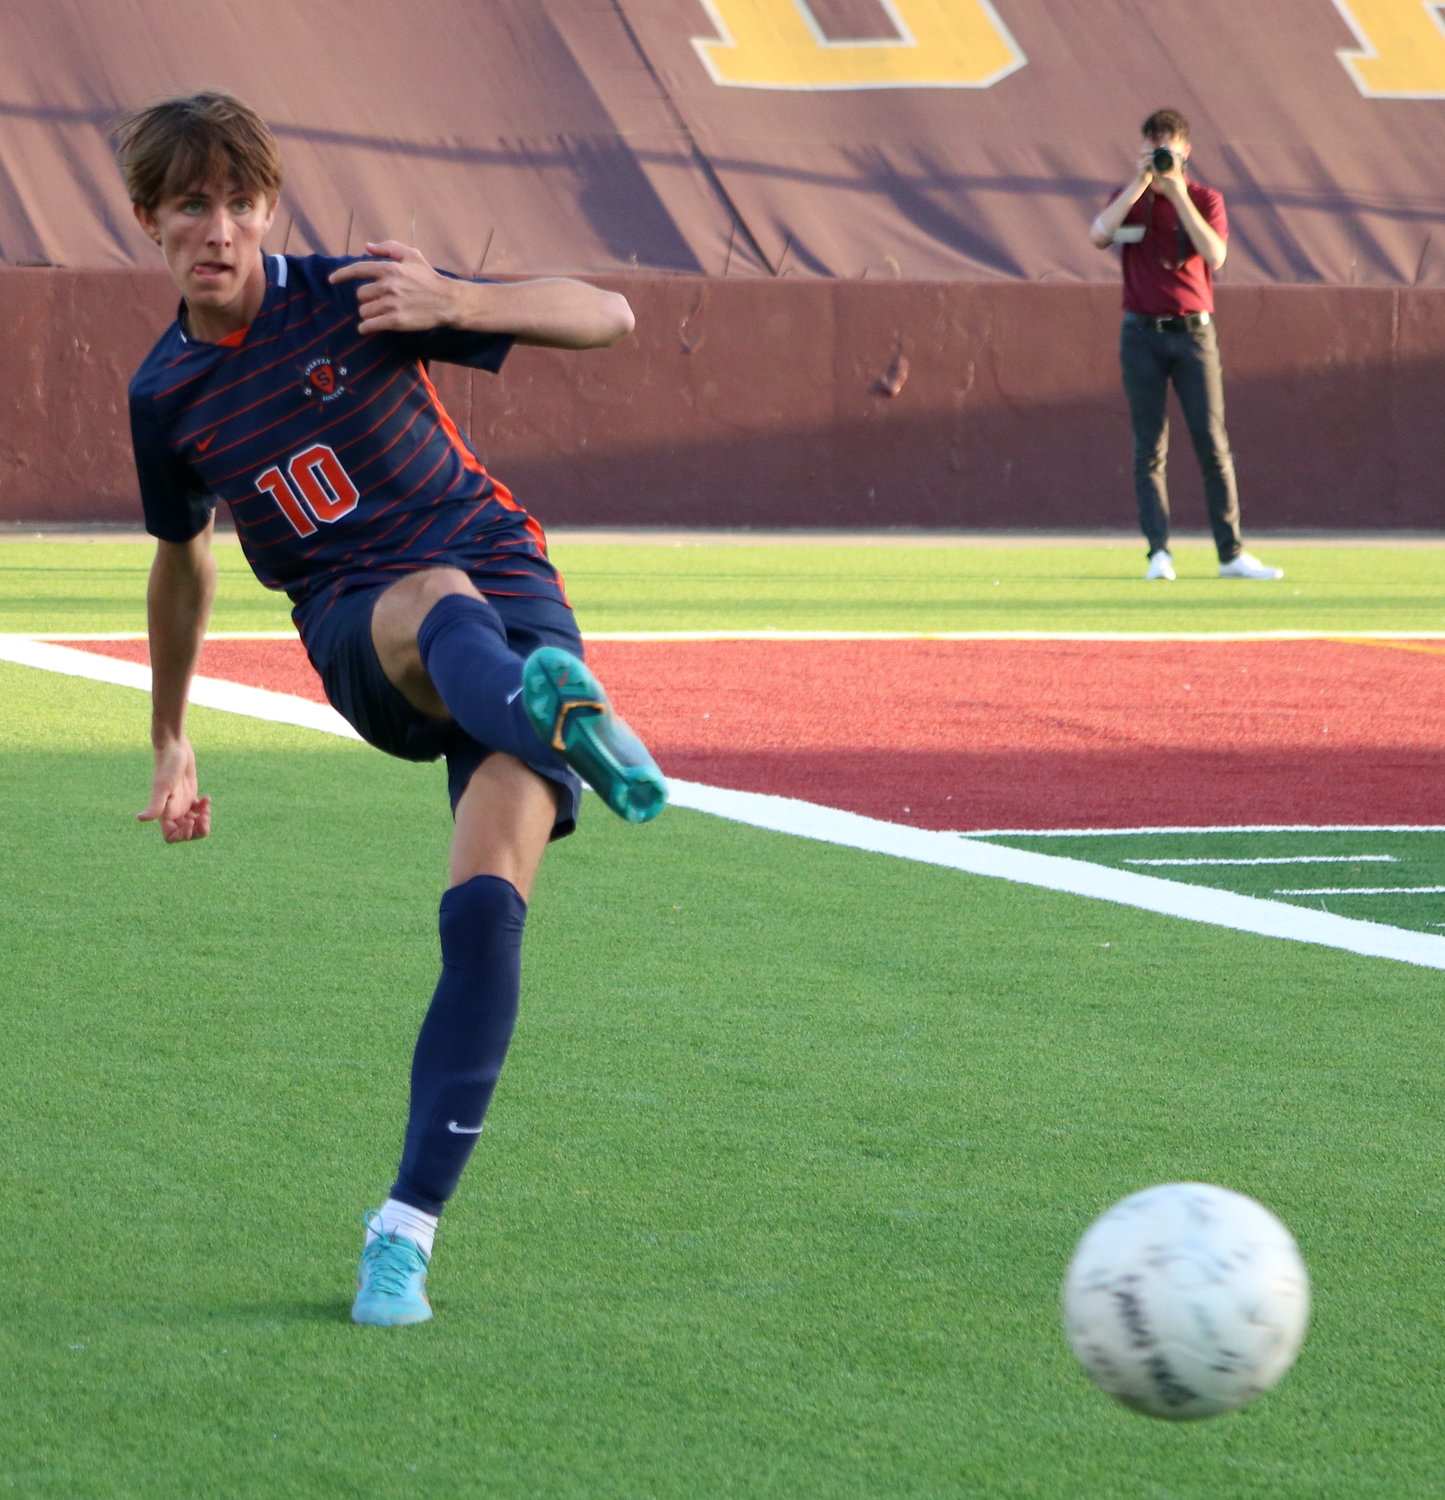 Aidan Morrison passes a ball during Friday’s Class 6A Region III Final between Seven Lakes and Deer Park at Abshire Stadium in Deer Park.